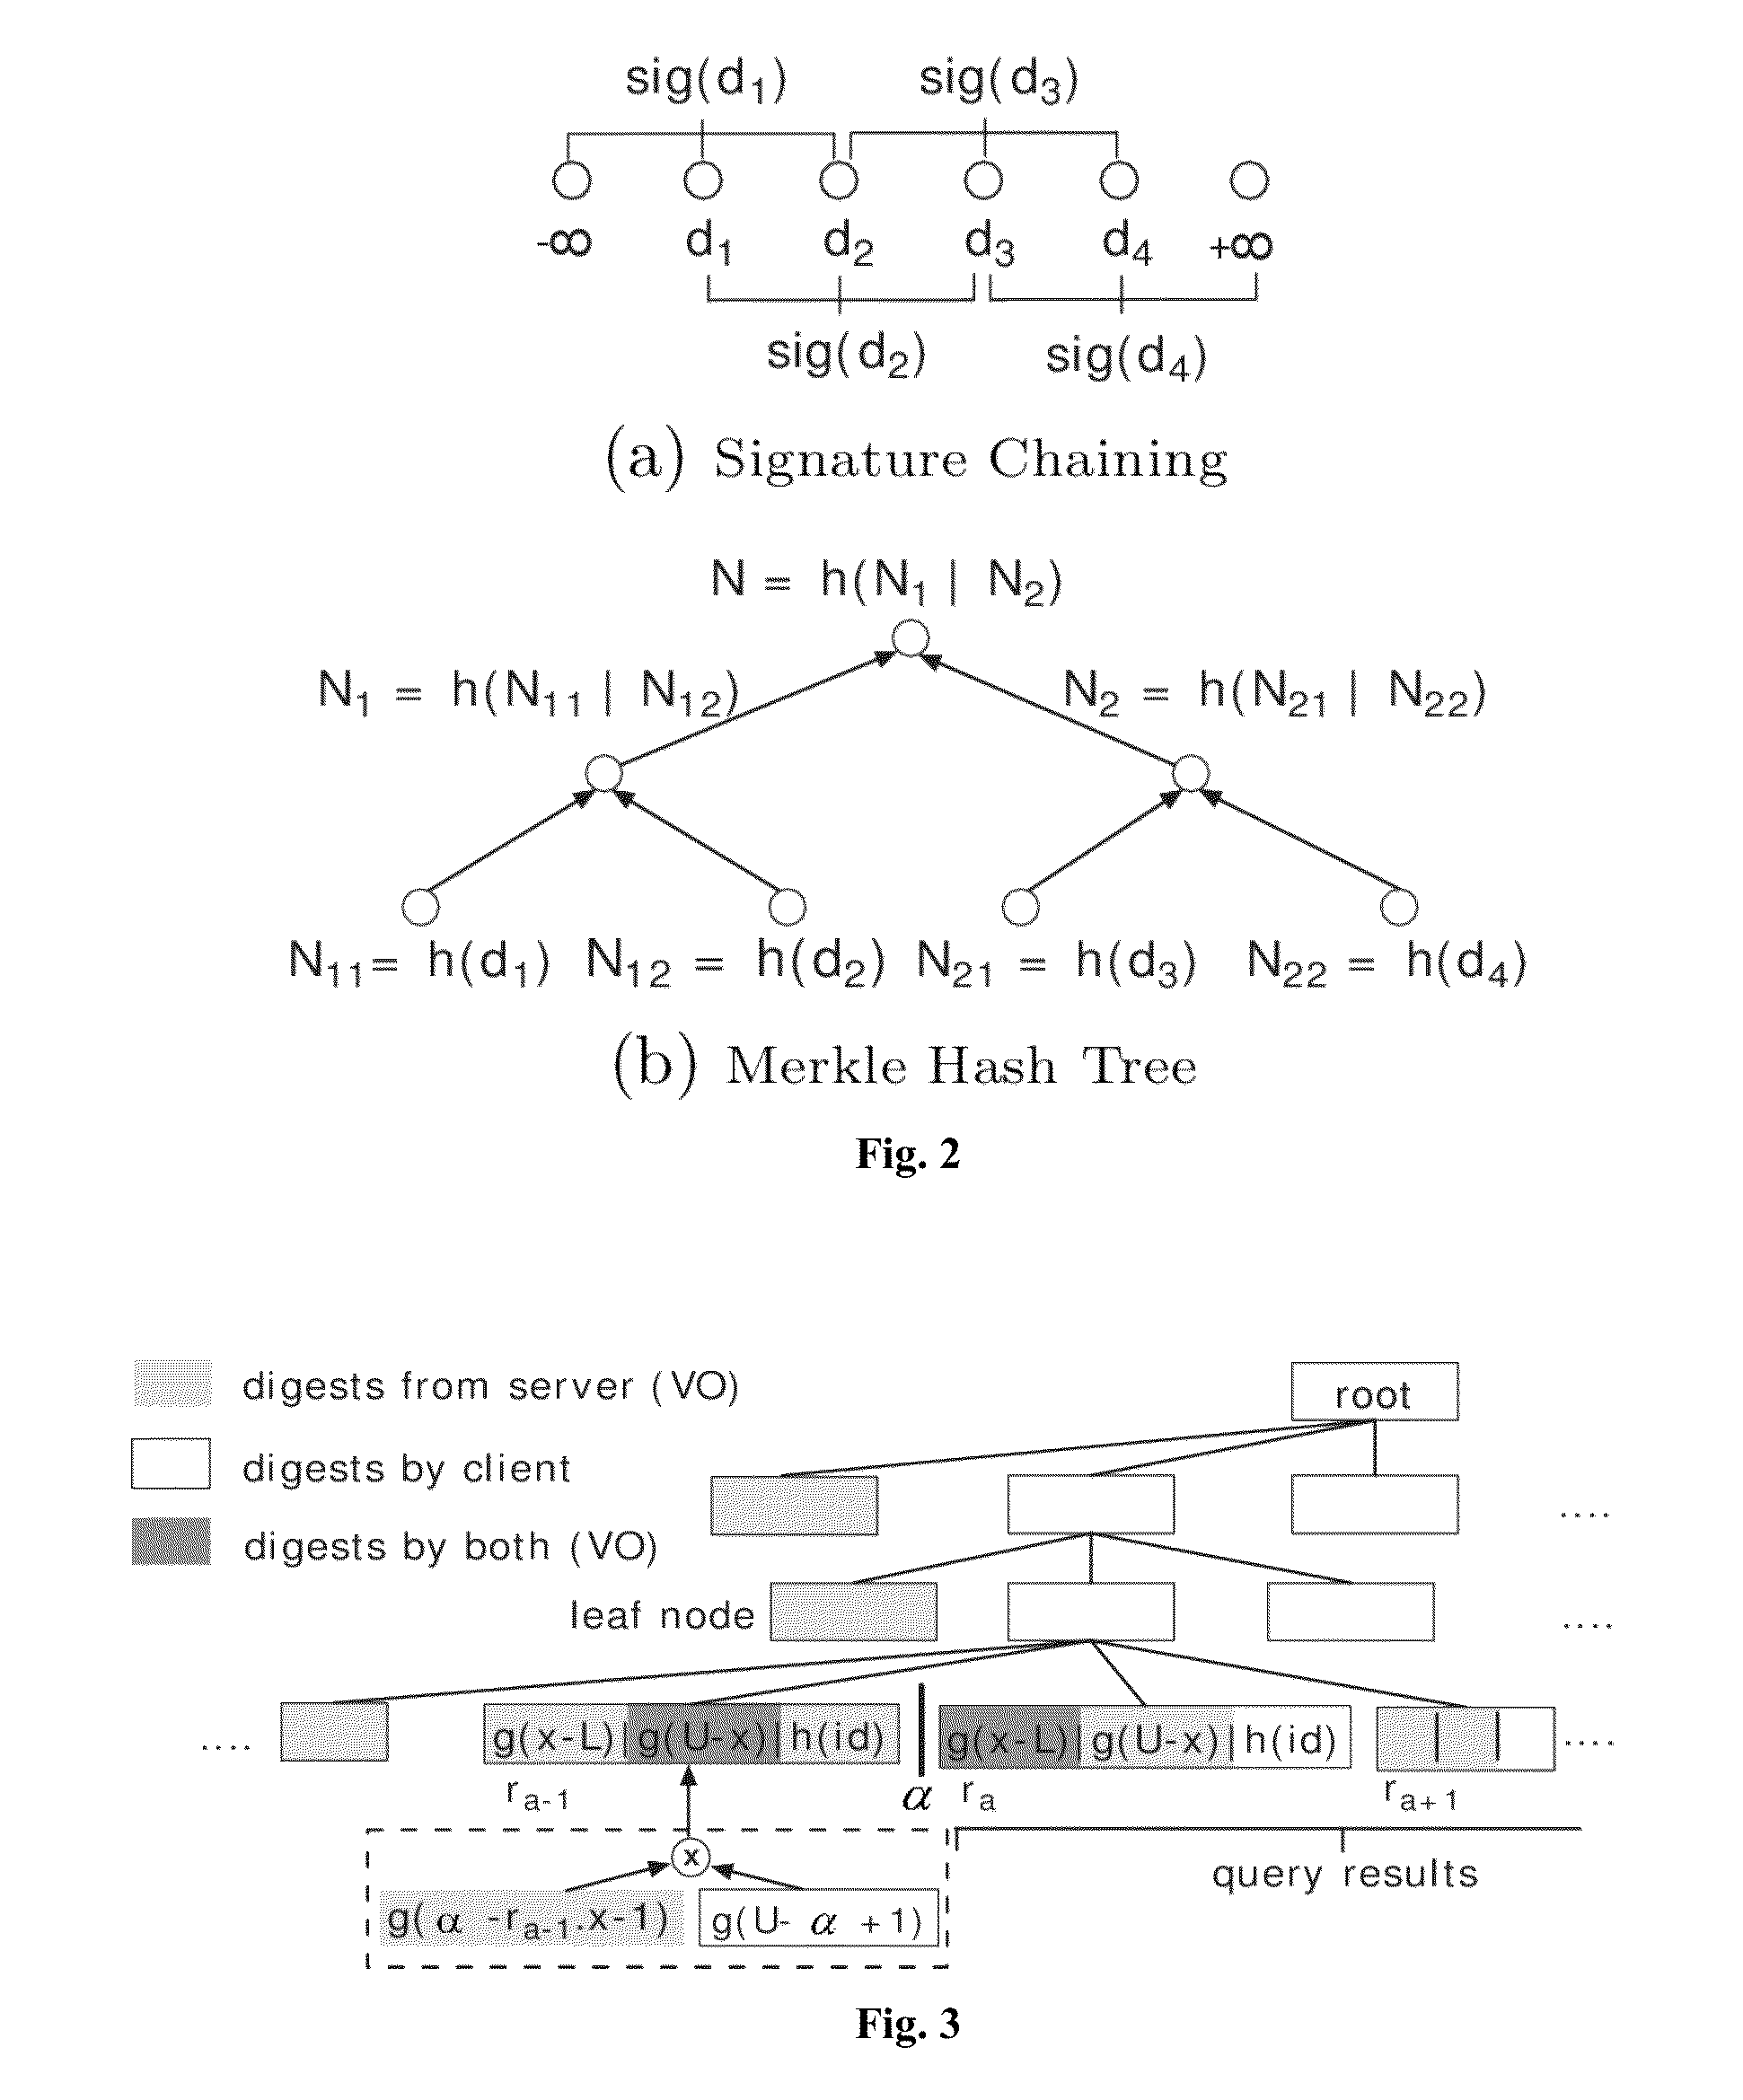 Method and apparatus for authenticating location-based services without compromising location privacy